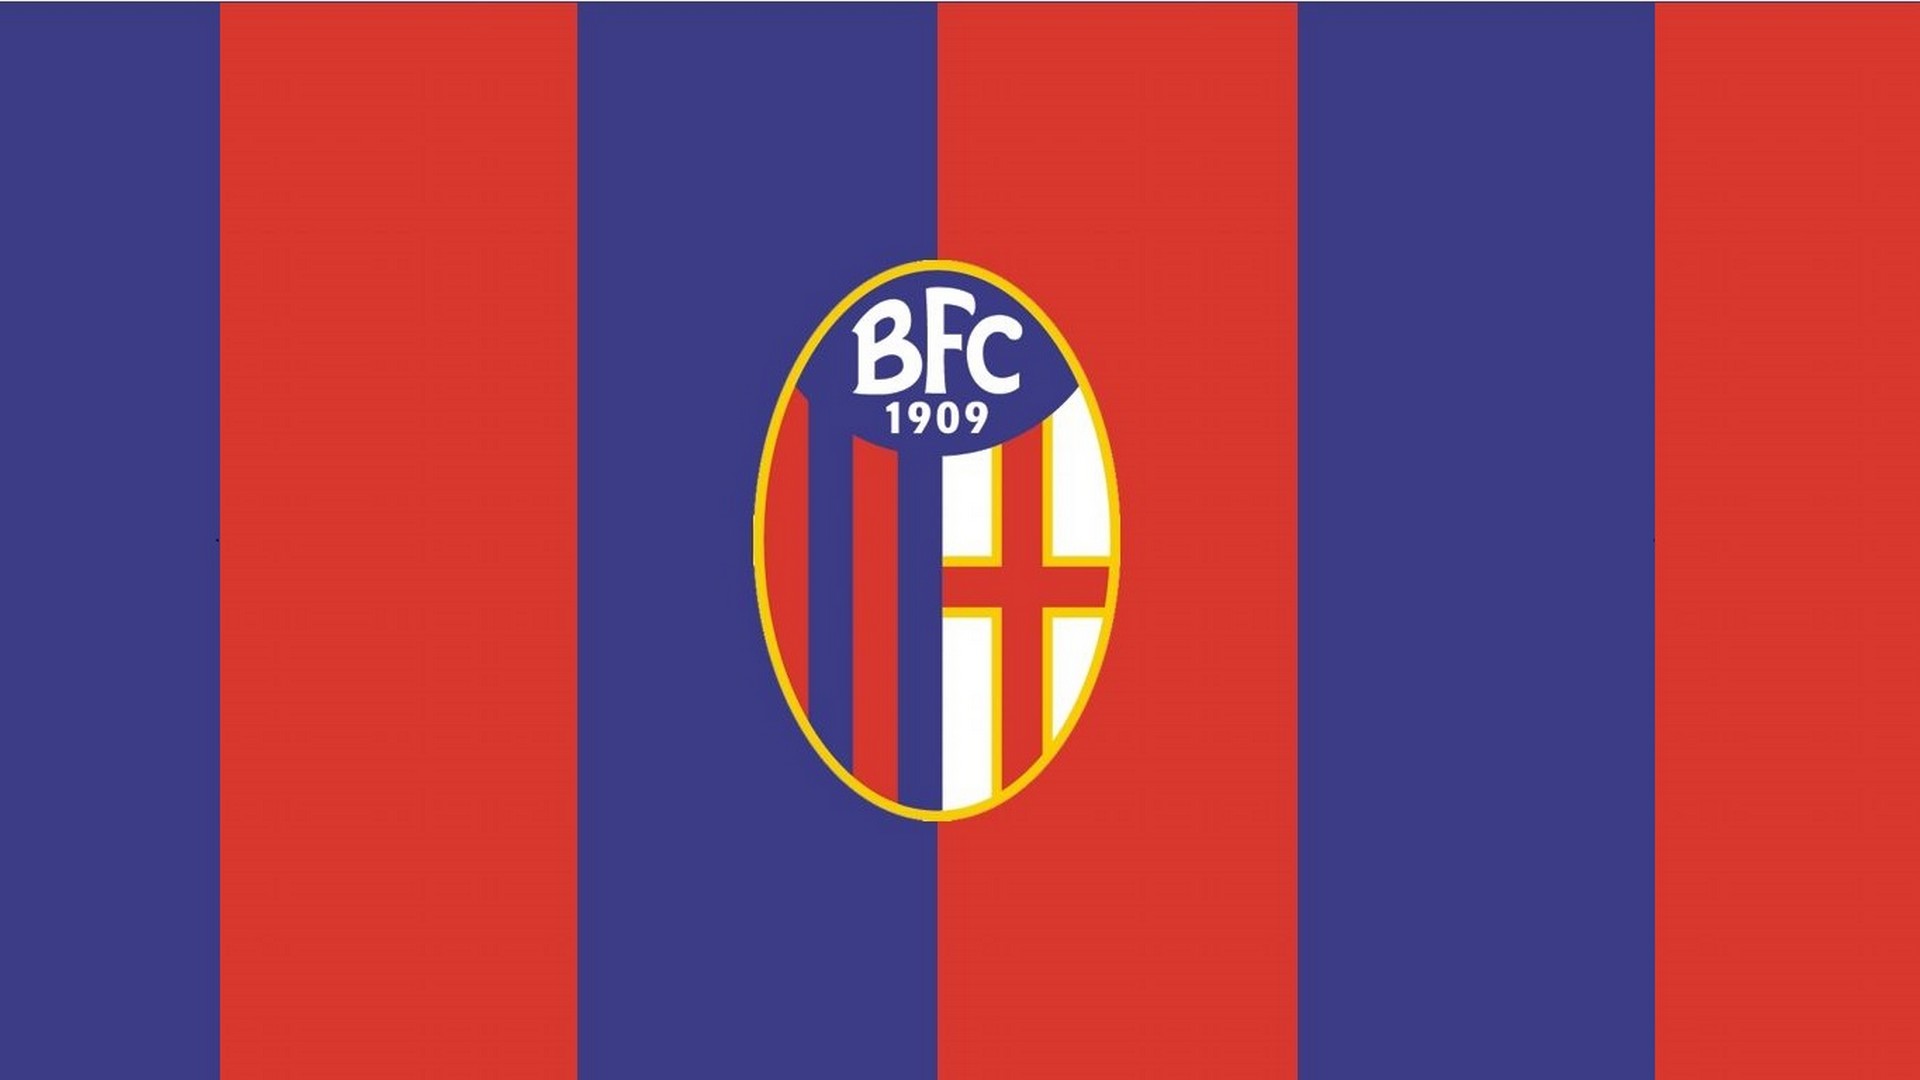 Bologna FC Wallpaper HD with high-resolution 1920x1080 pixel. You can use this wallpaper for your Desktop Computers, Mac Screensavers, Windows Backgrounds, iPhone Wallpapers, Tablet or Android Lock screen and another Mobile device